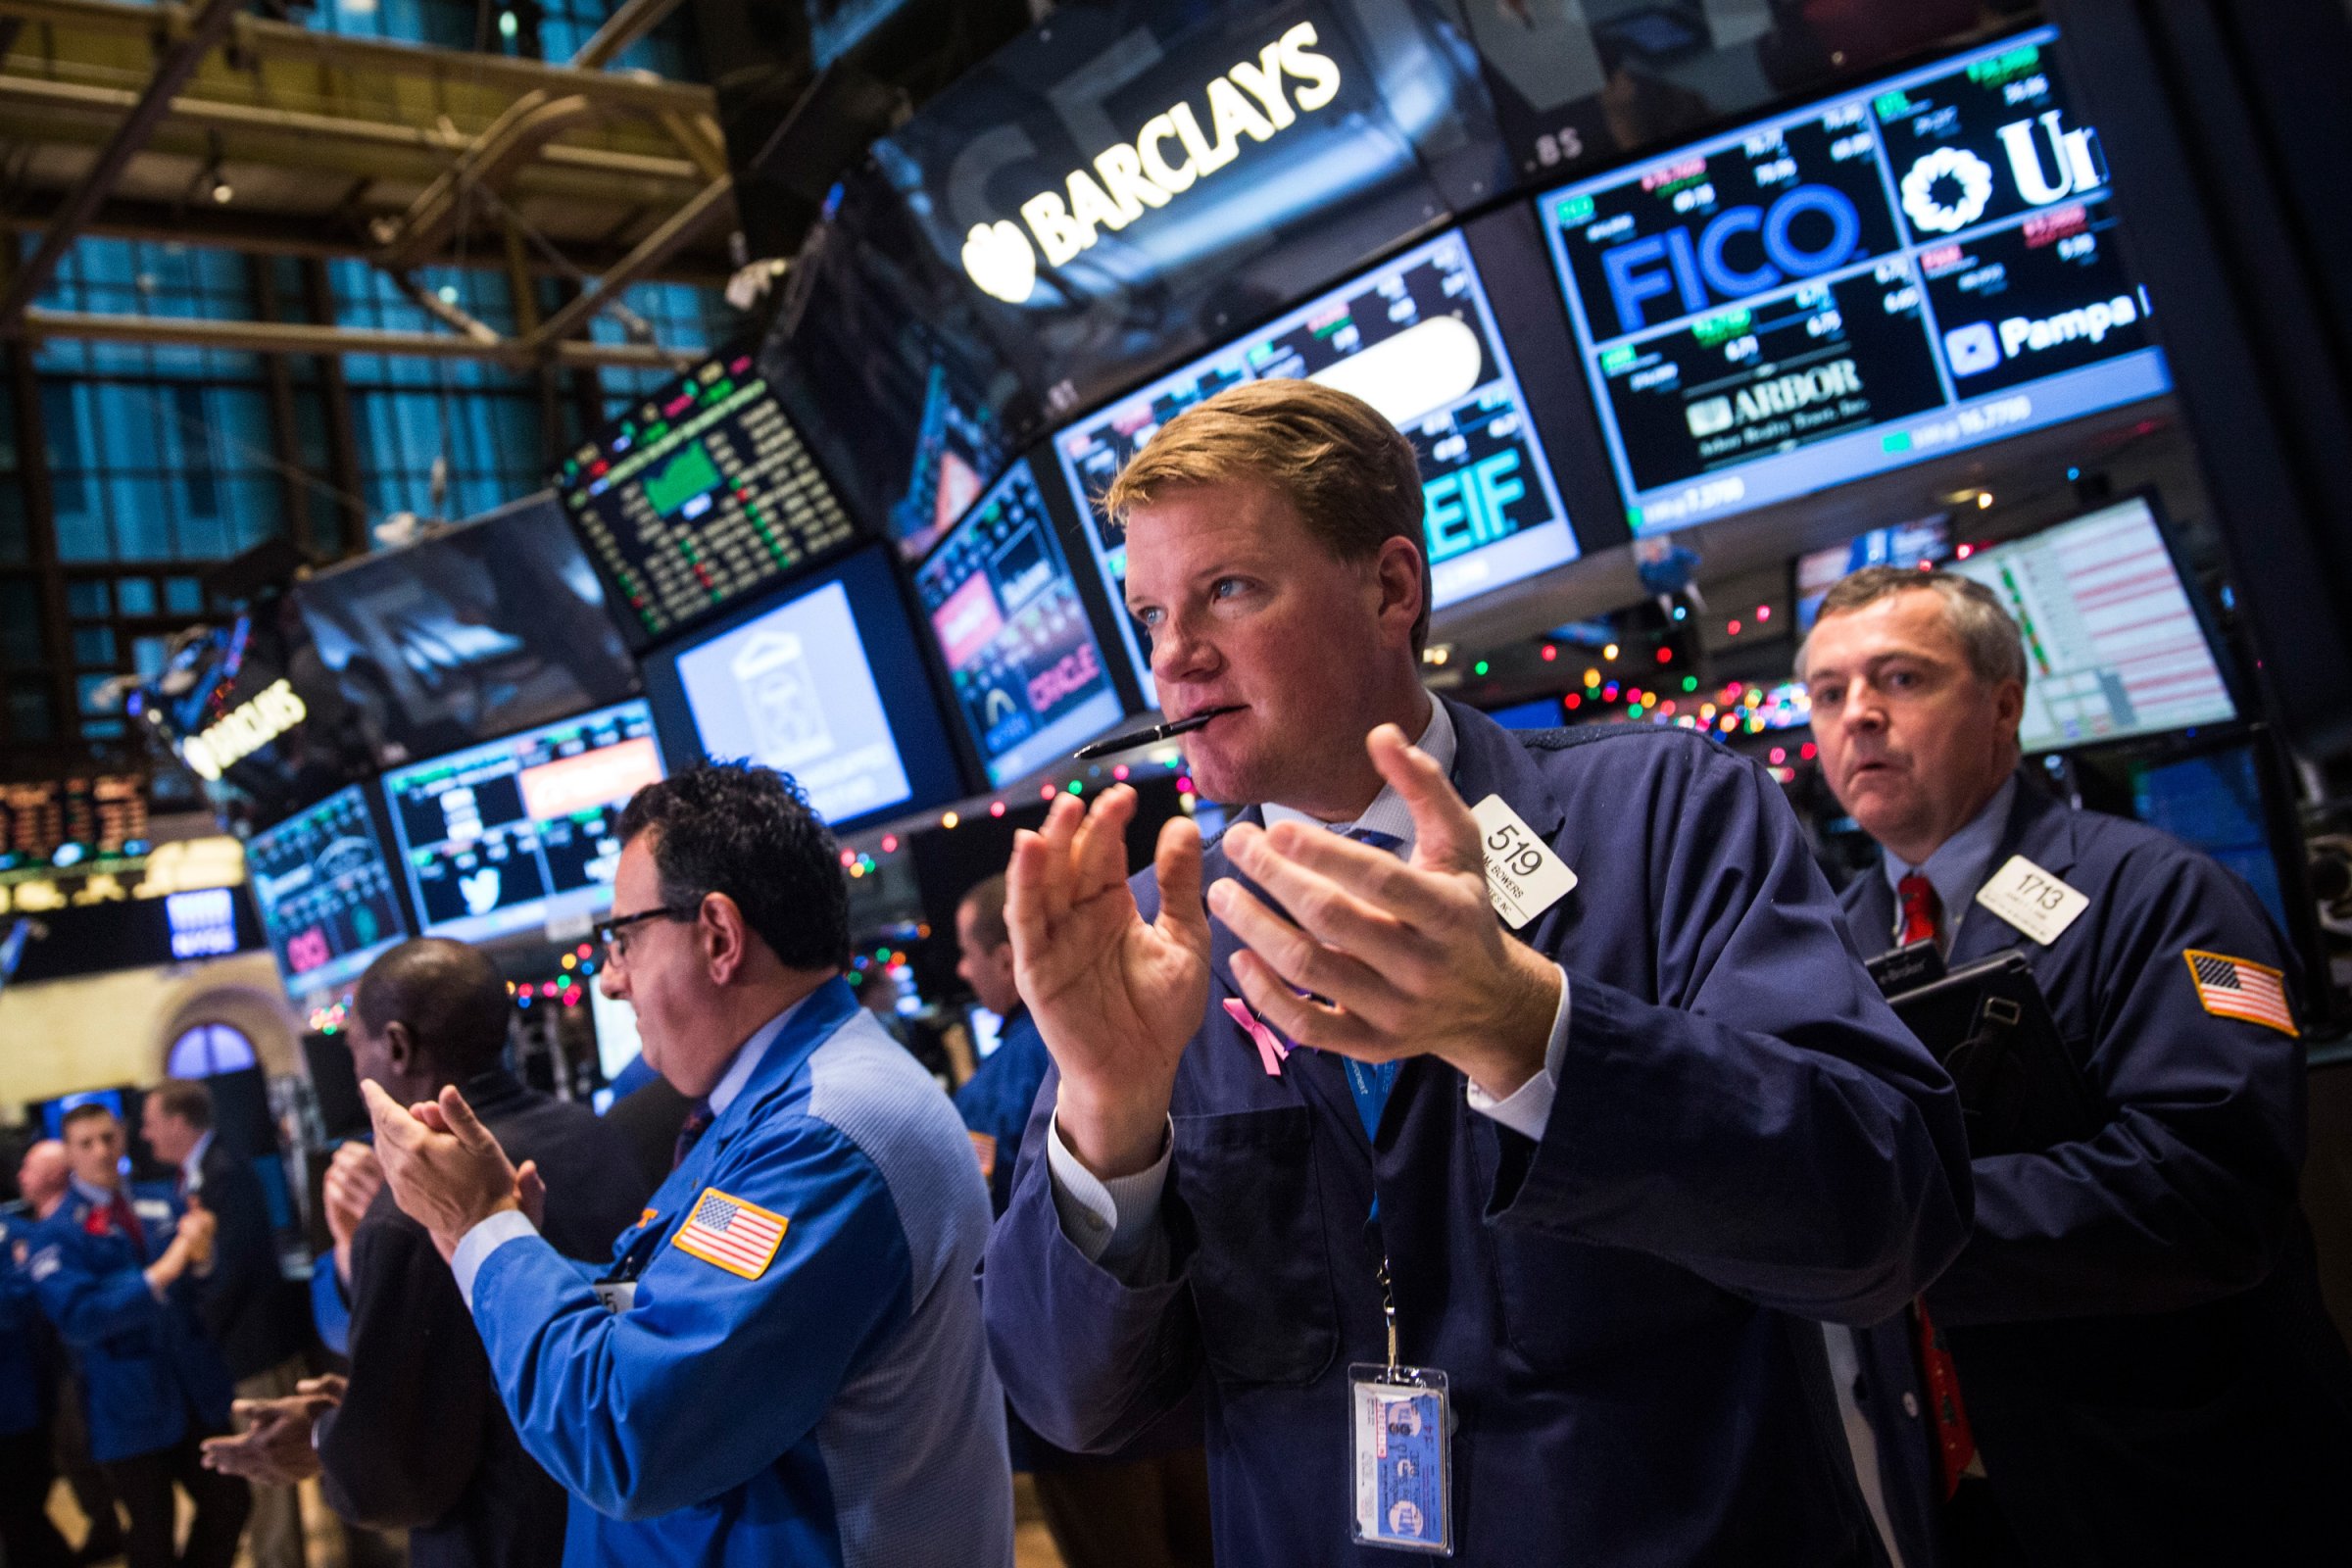 Traders on the floor of the New York Stock Exchange on Dec. 18, 2014.